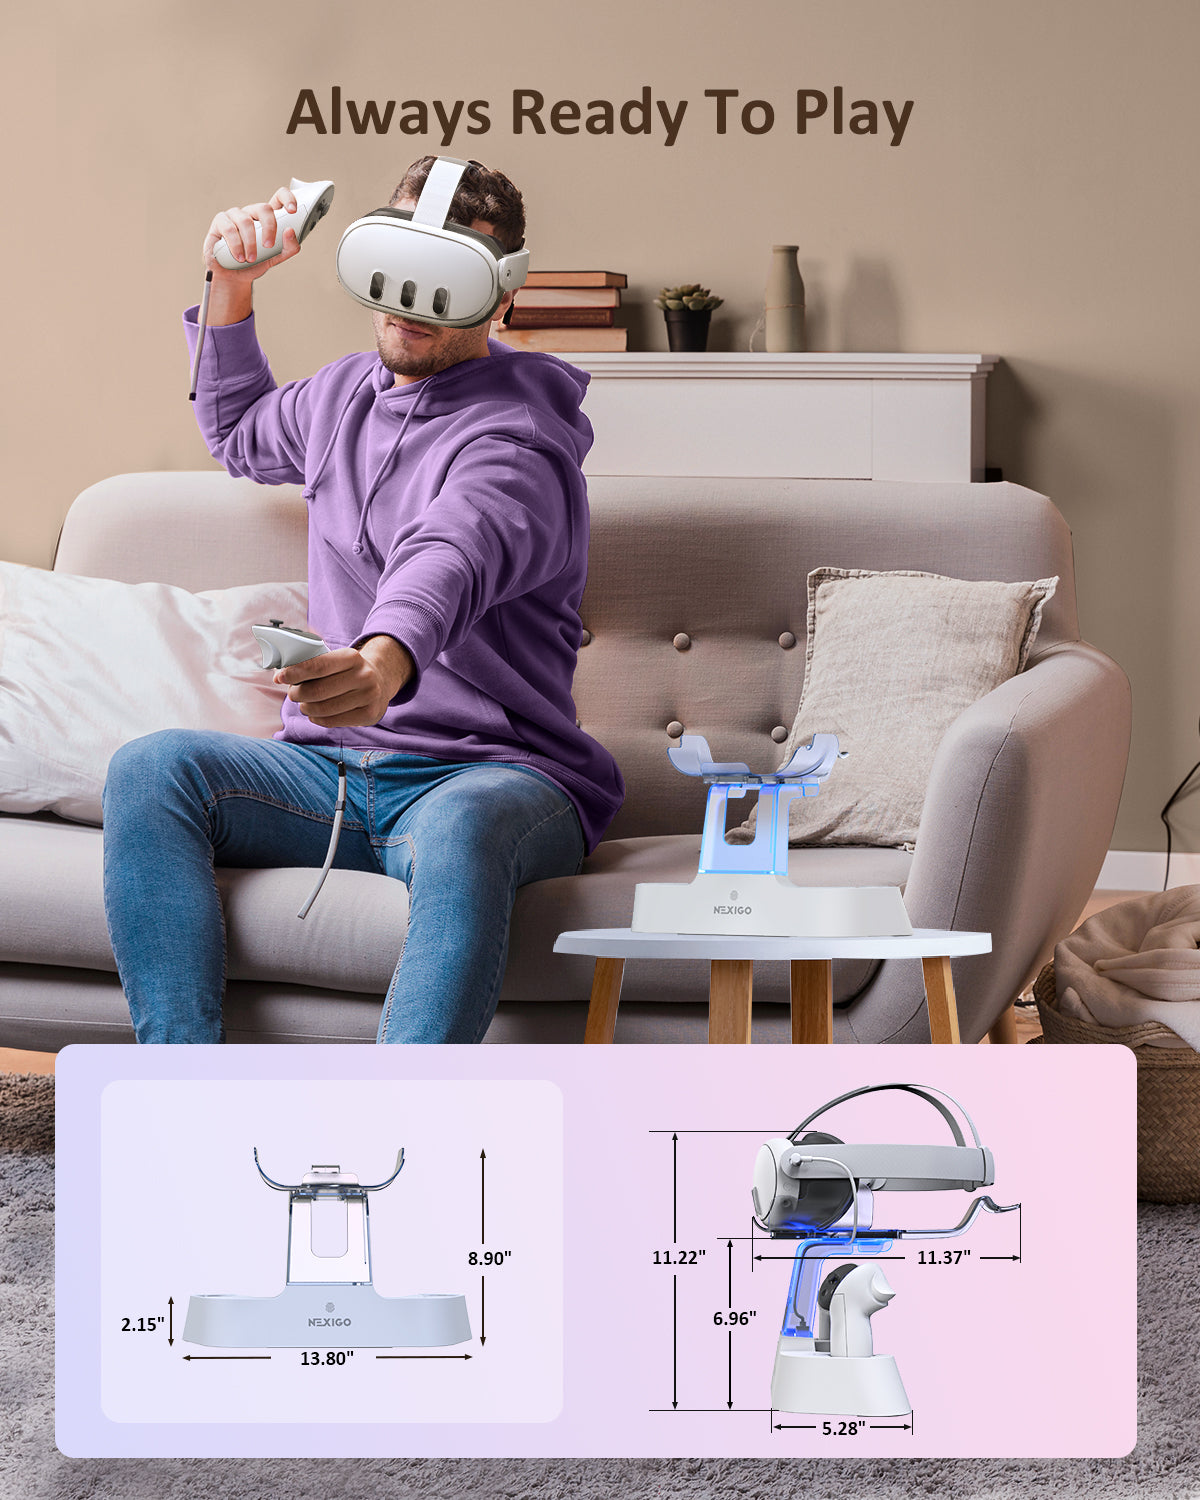 A person is sitting on the sofa playing VR games with an S20 Pro charging dock